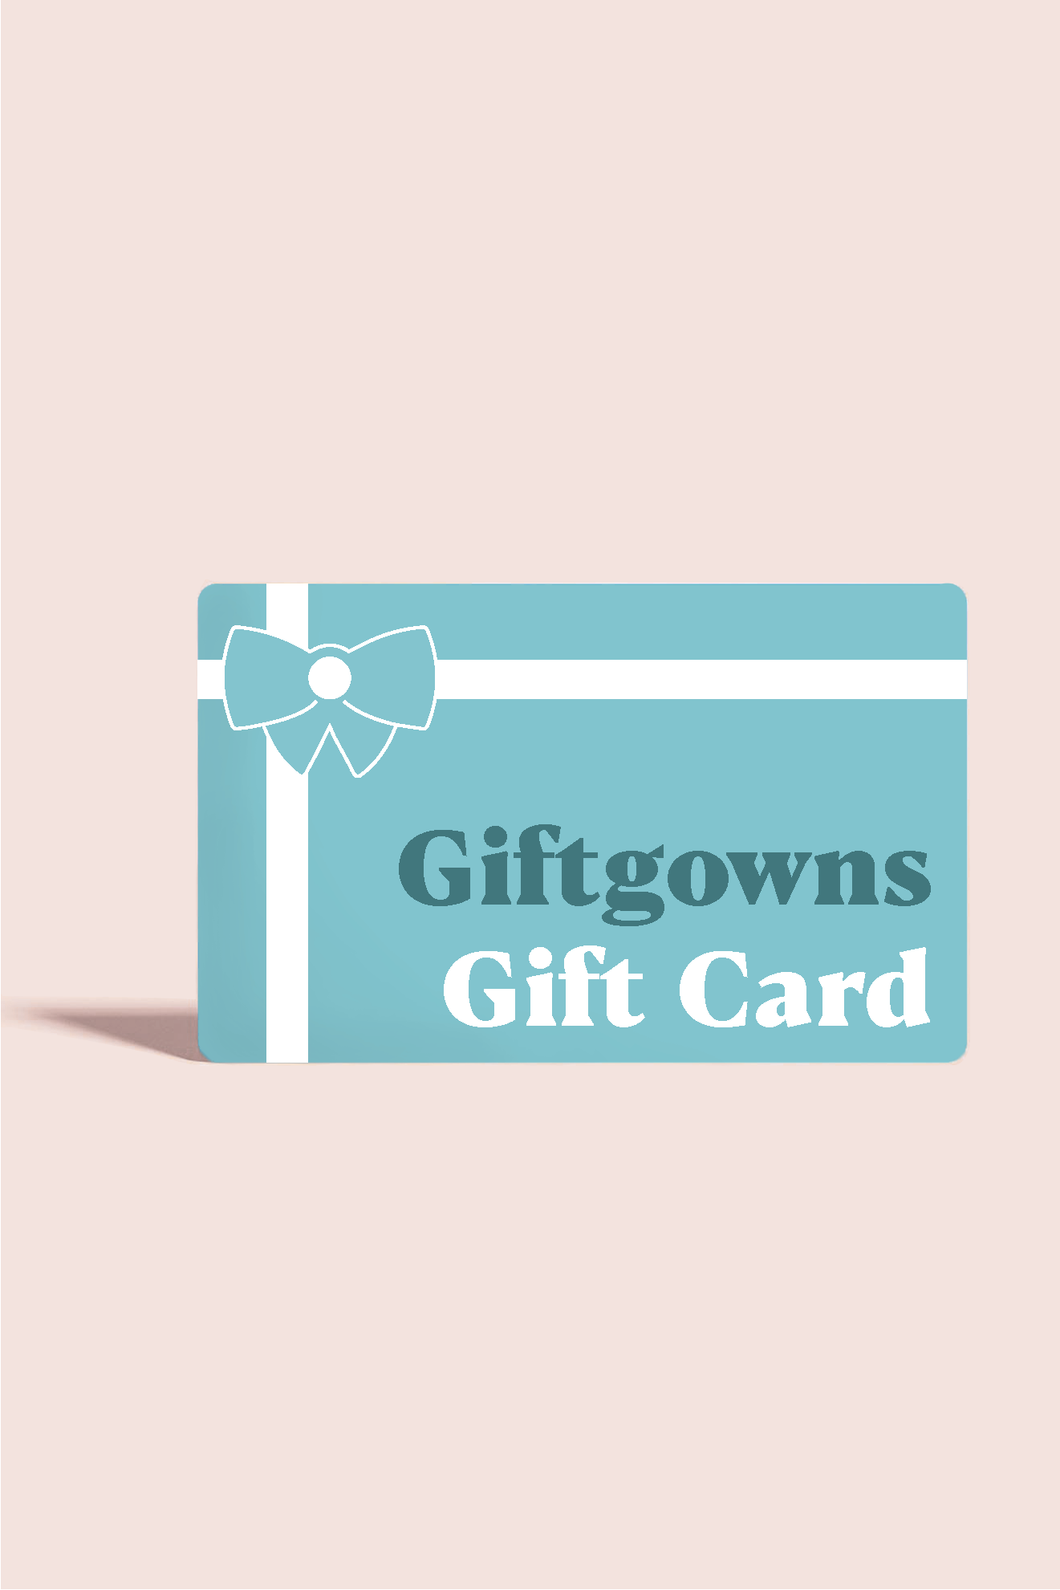 $50 USD Gift Card